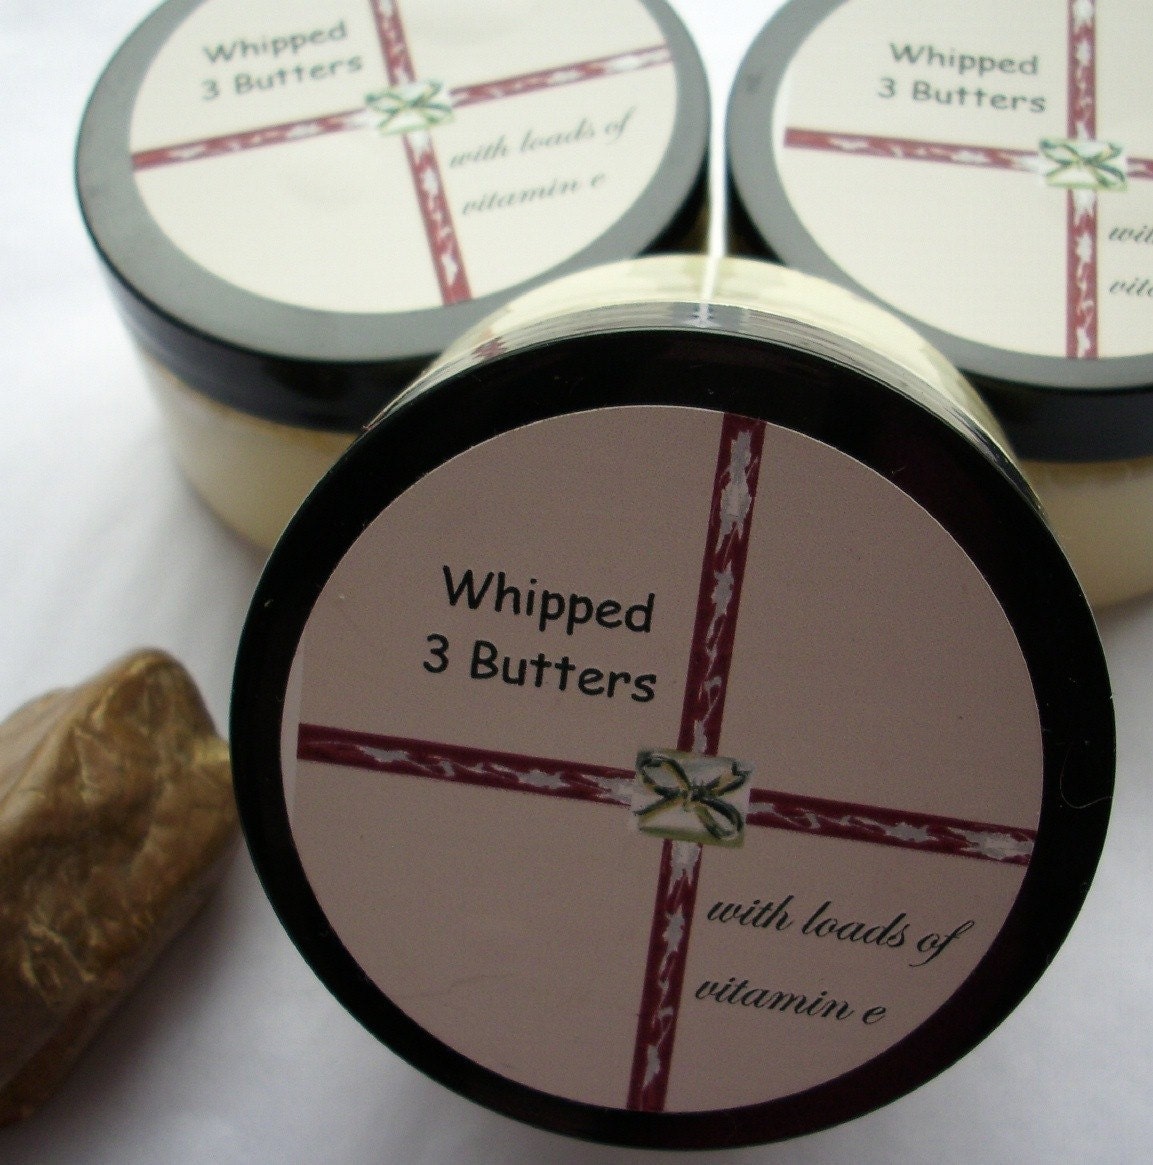 Whipped 3 Butters, Unscented